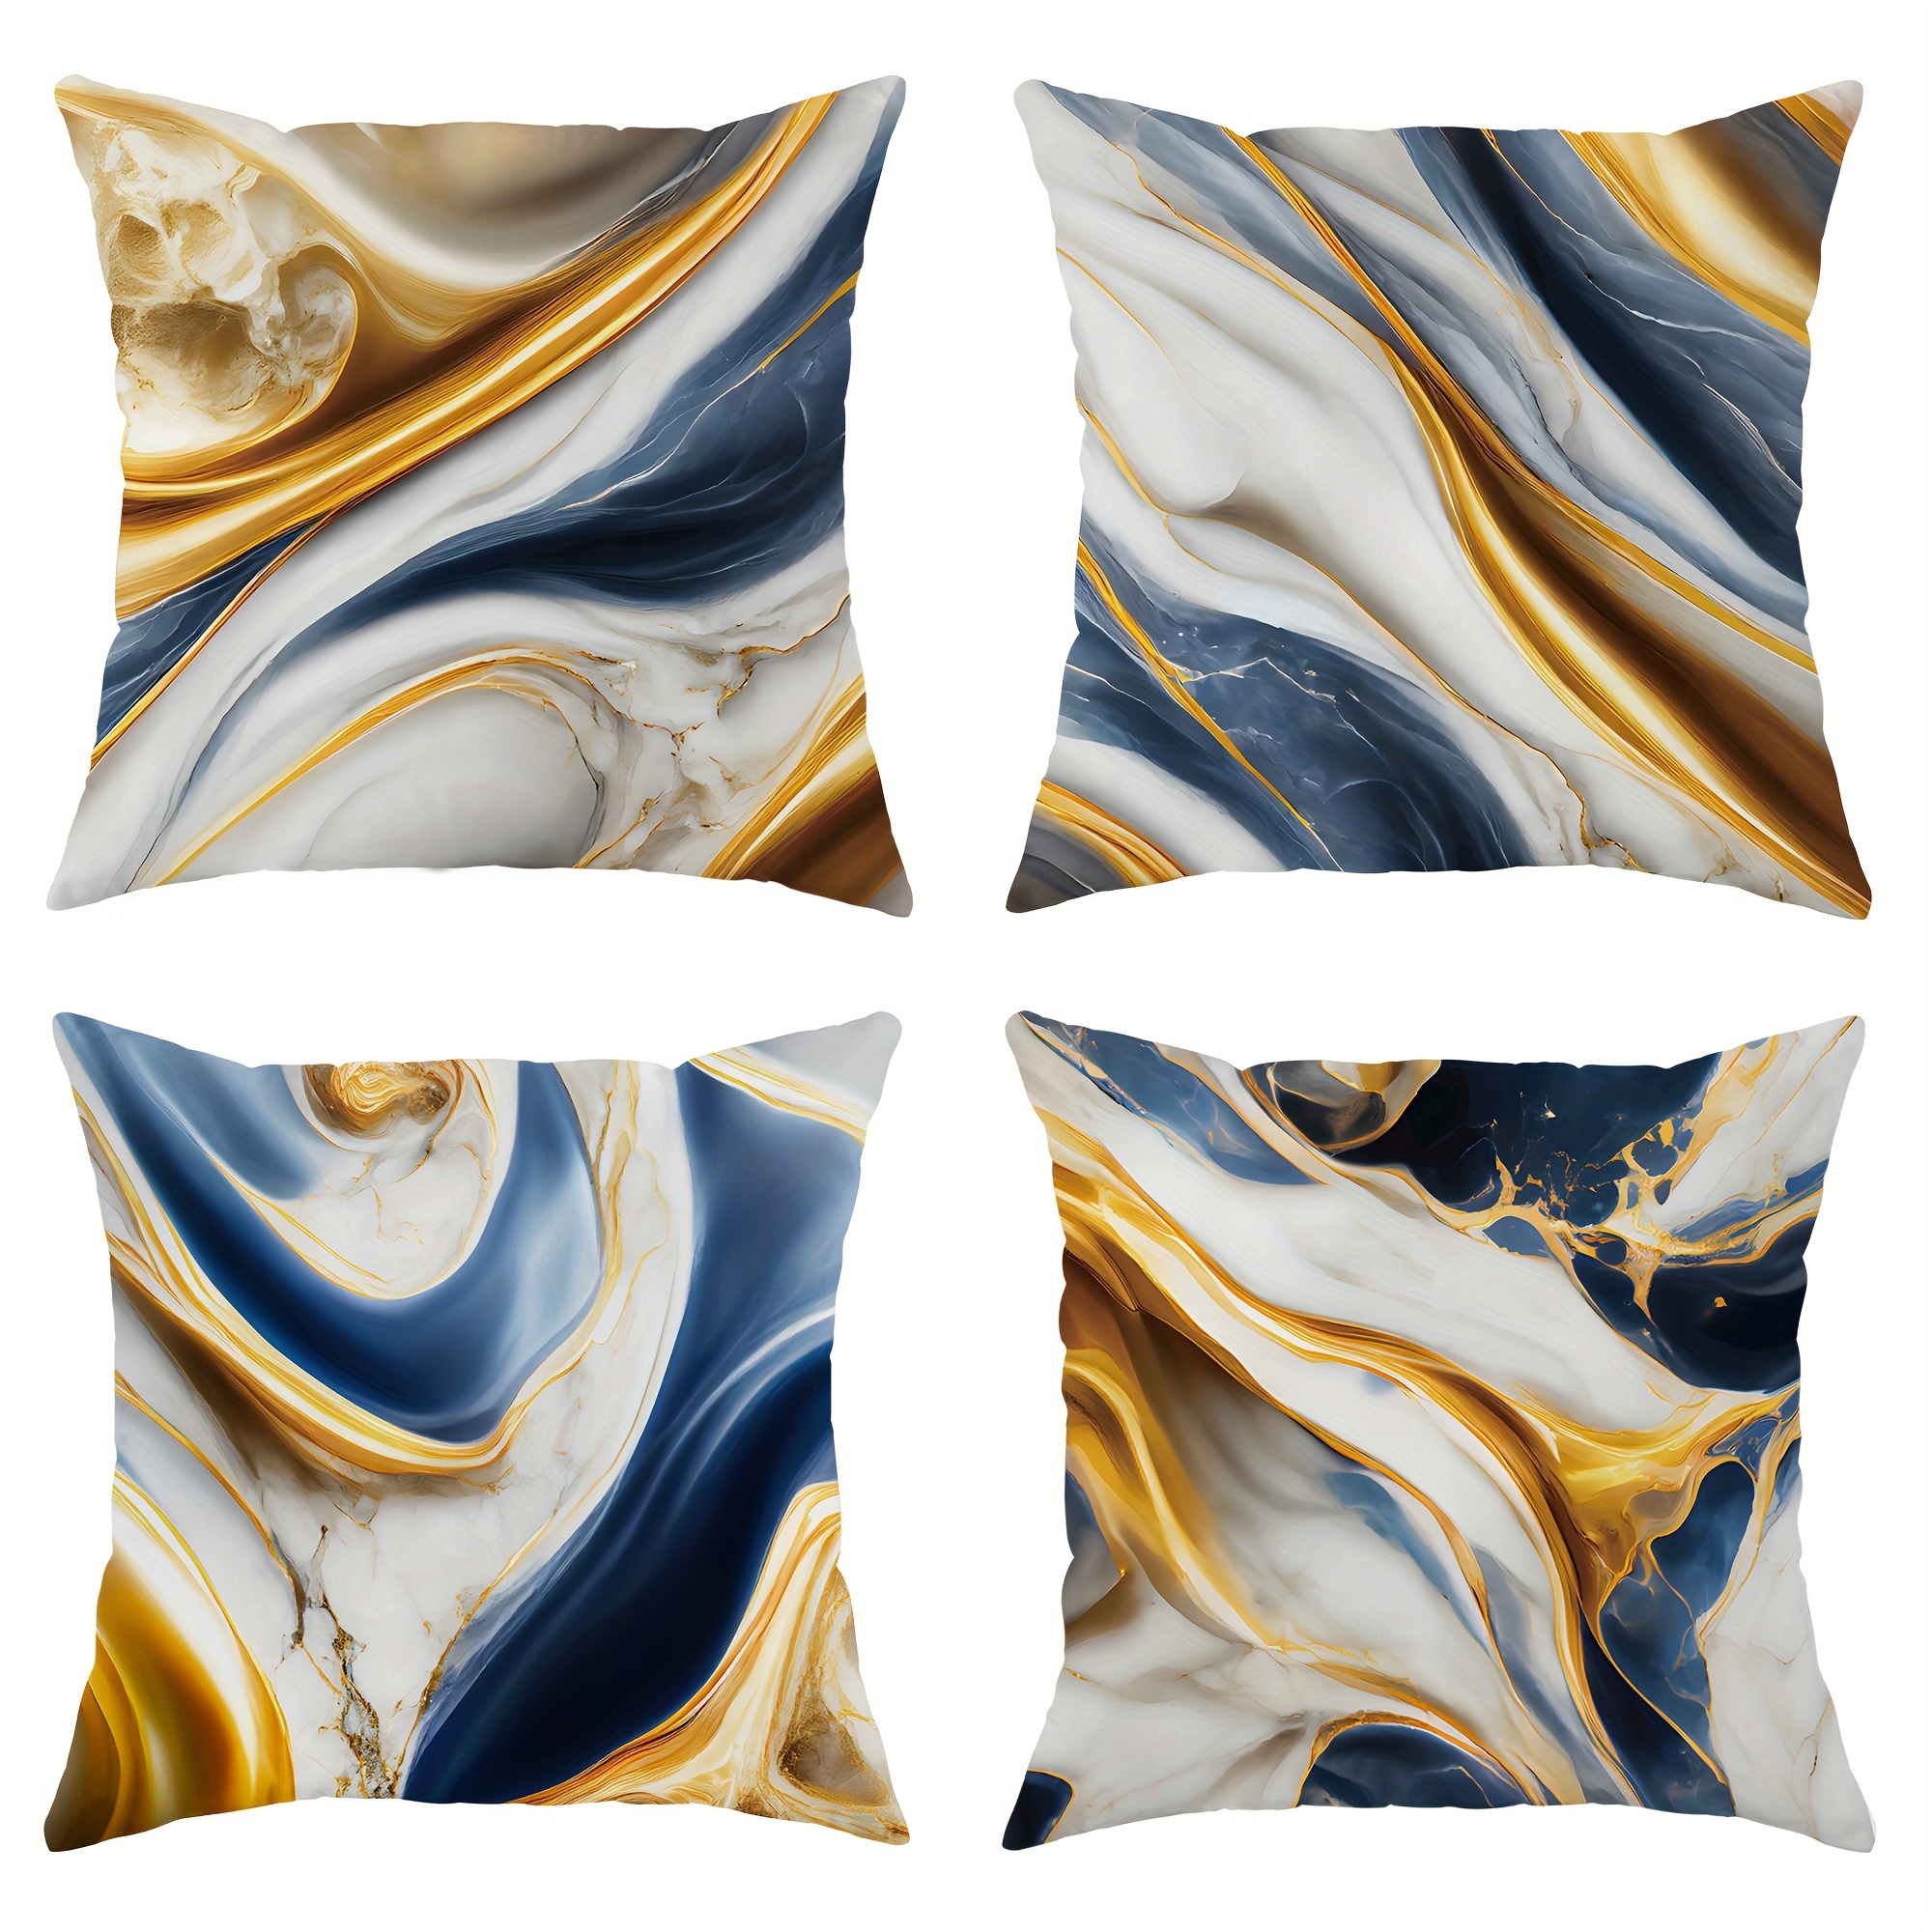 

4-pack Contemporary Abstract Marble Velvet Throw Pillow Covers, 18x18 Inch, Machine Washable, Zipper Closure, Decorative Pillowcases For Living Room, Sofa, Bedroom - Polyester, Gold White Blue